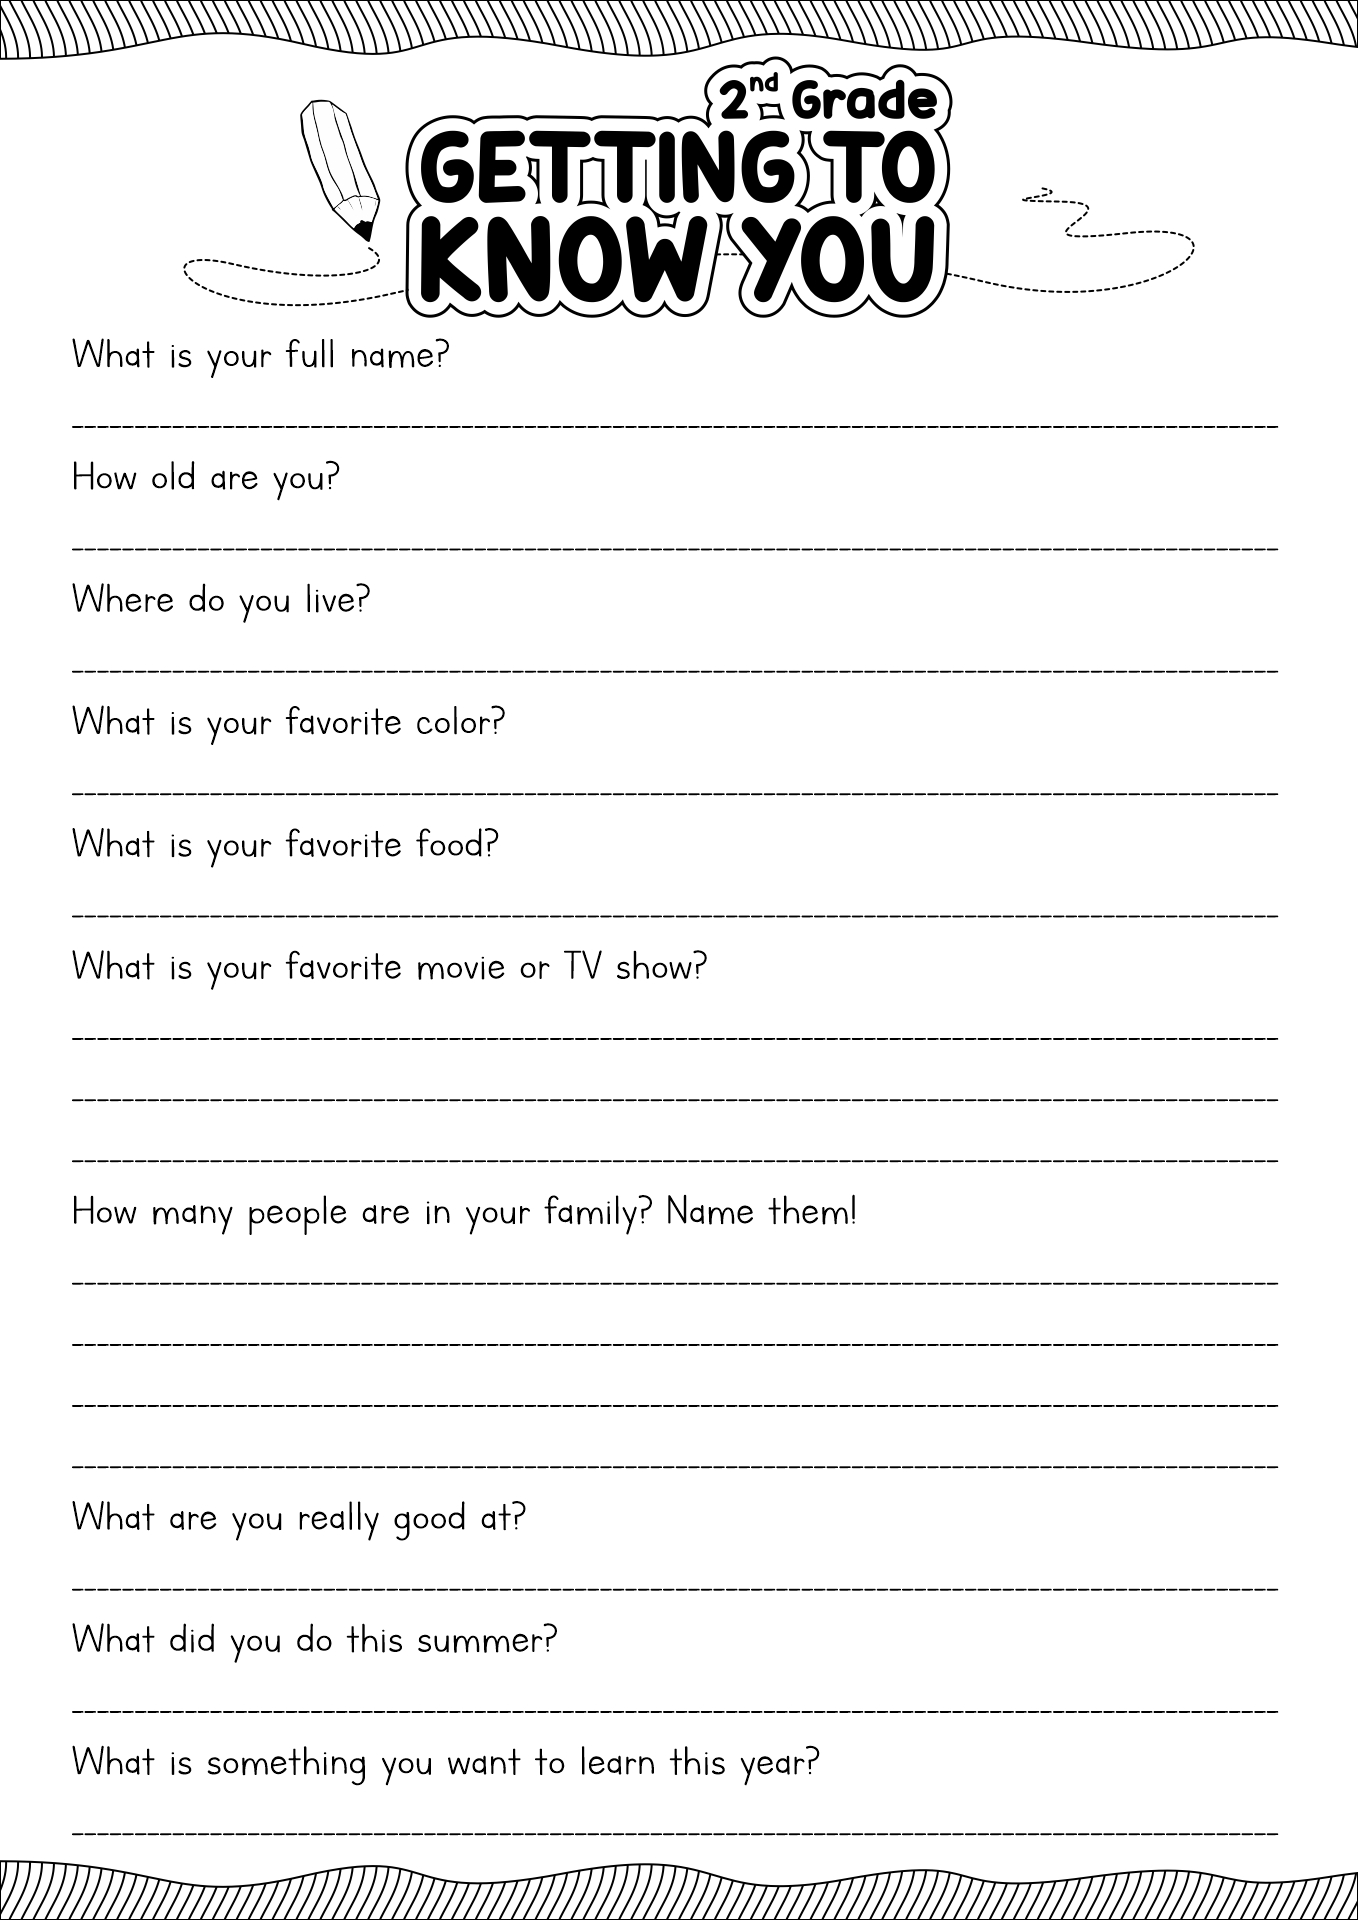 free-printable-get-to-know-you-worksheets